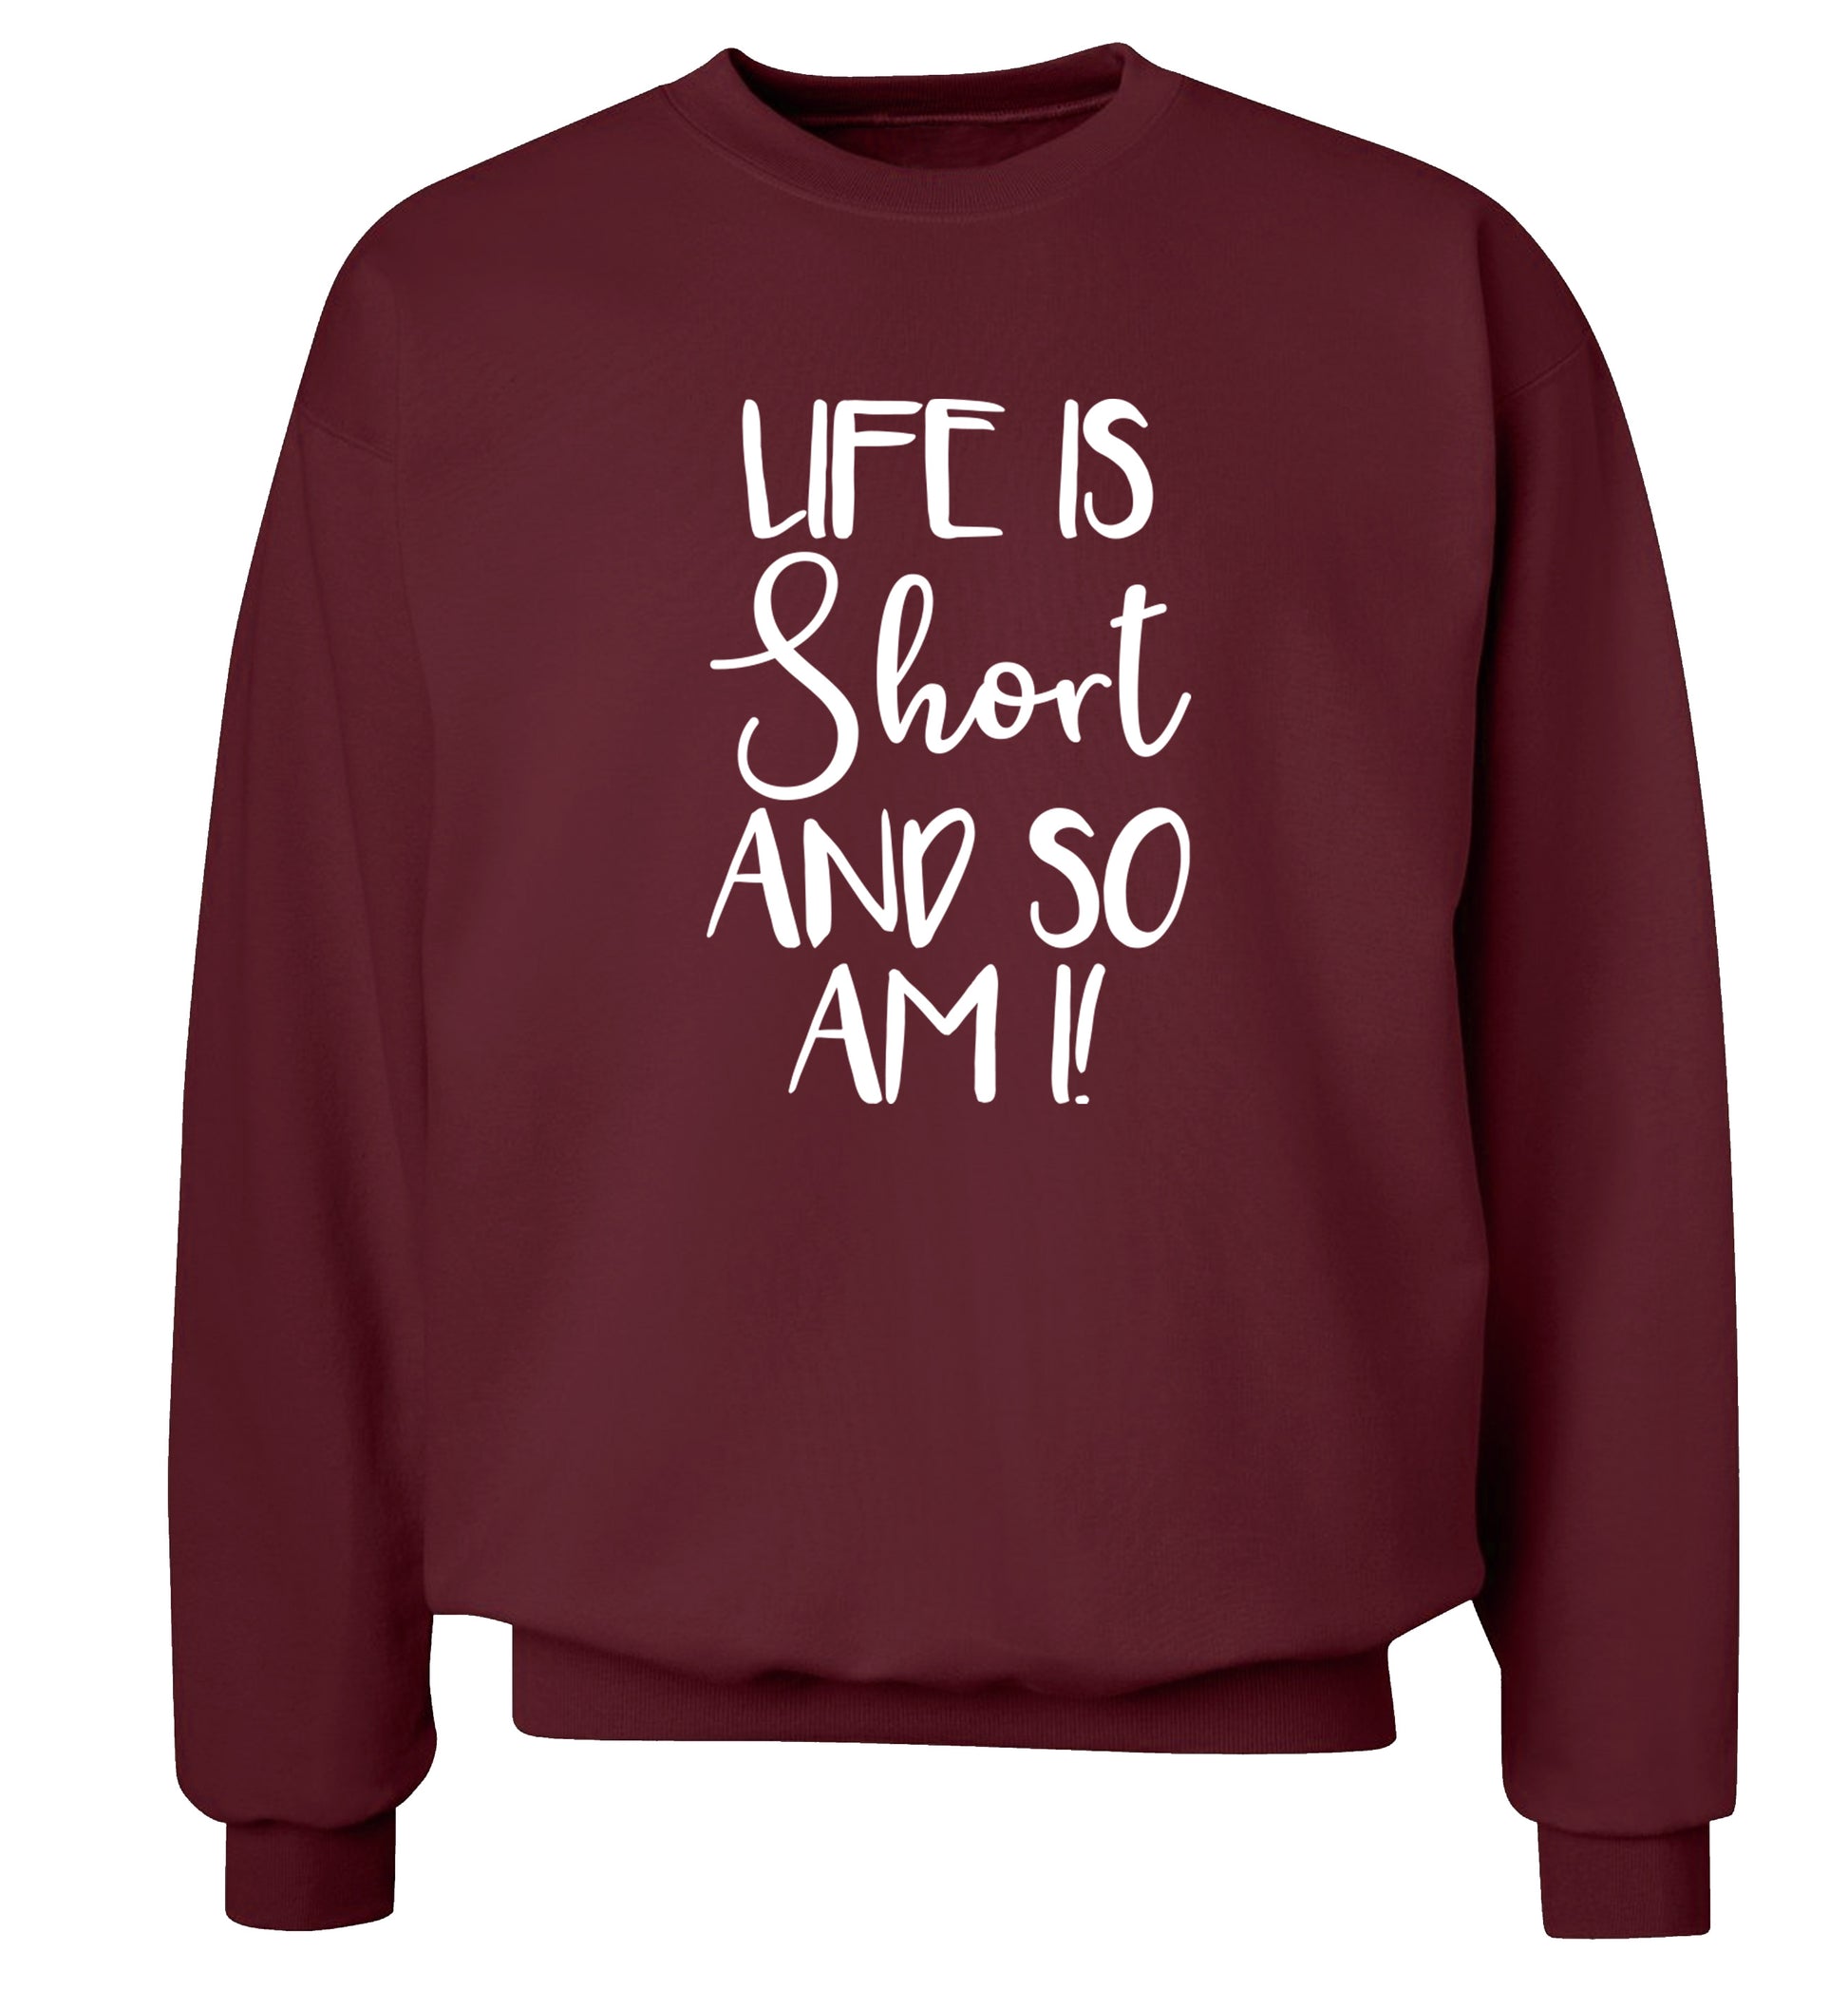 Life is short and so am I! Adult's unisex maroon Sweater 2XL